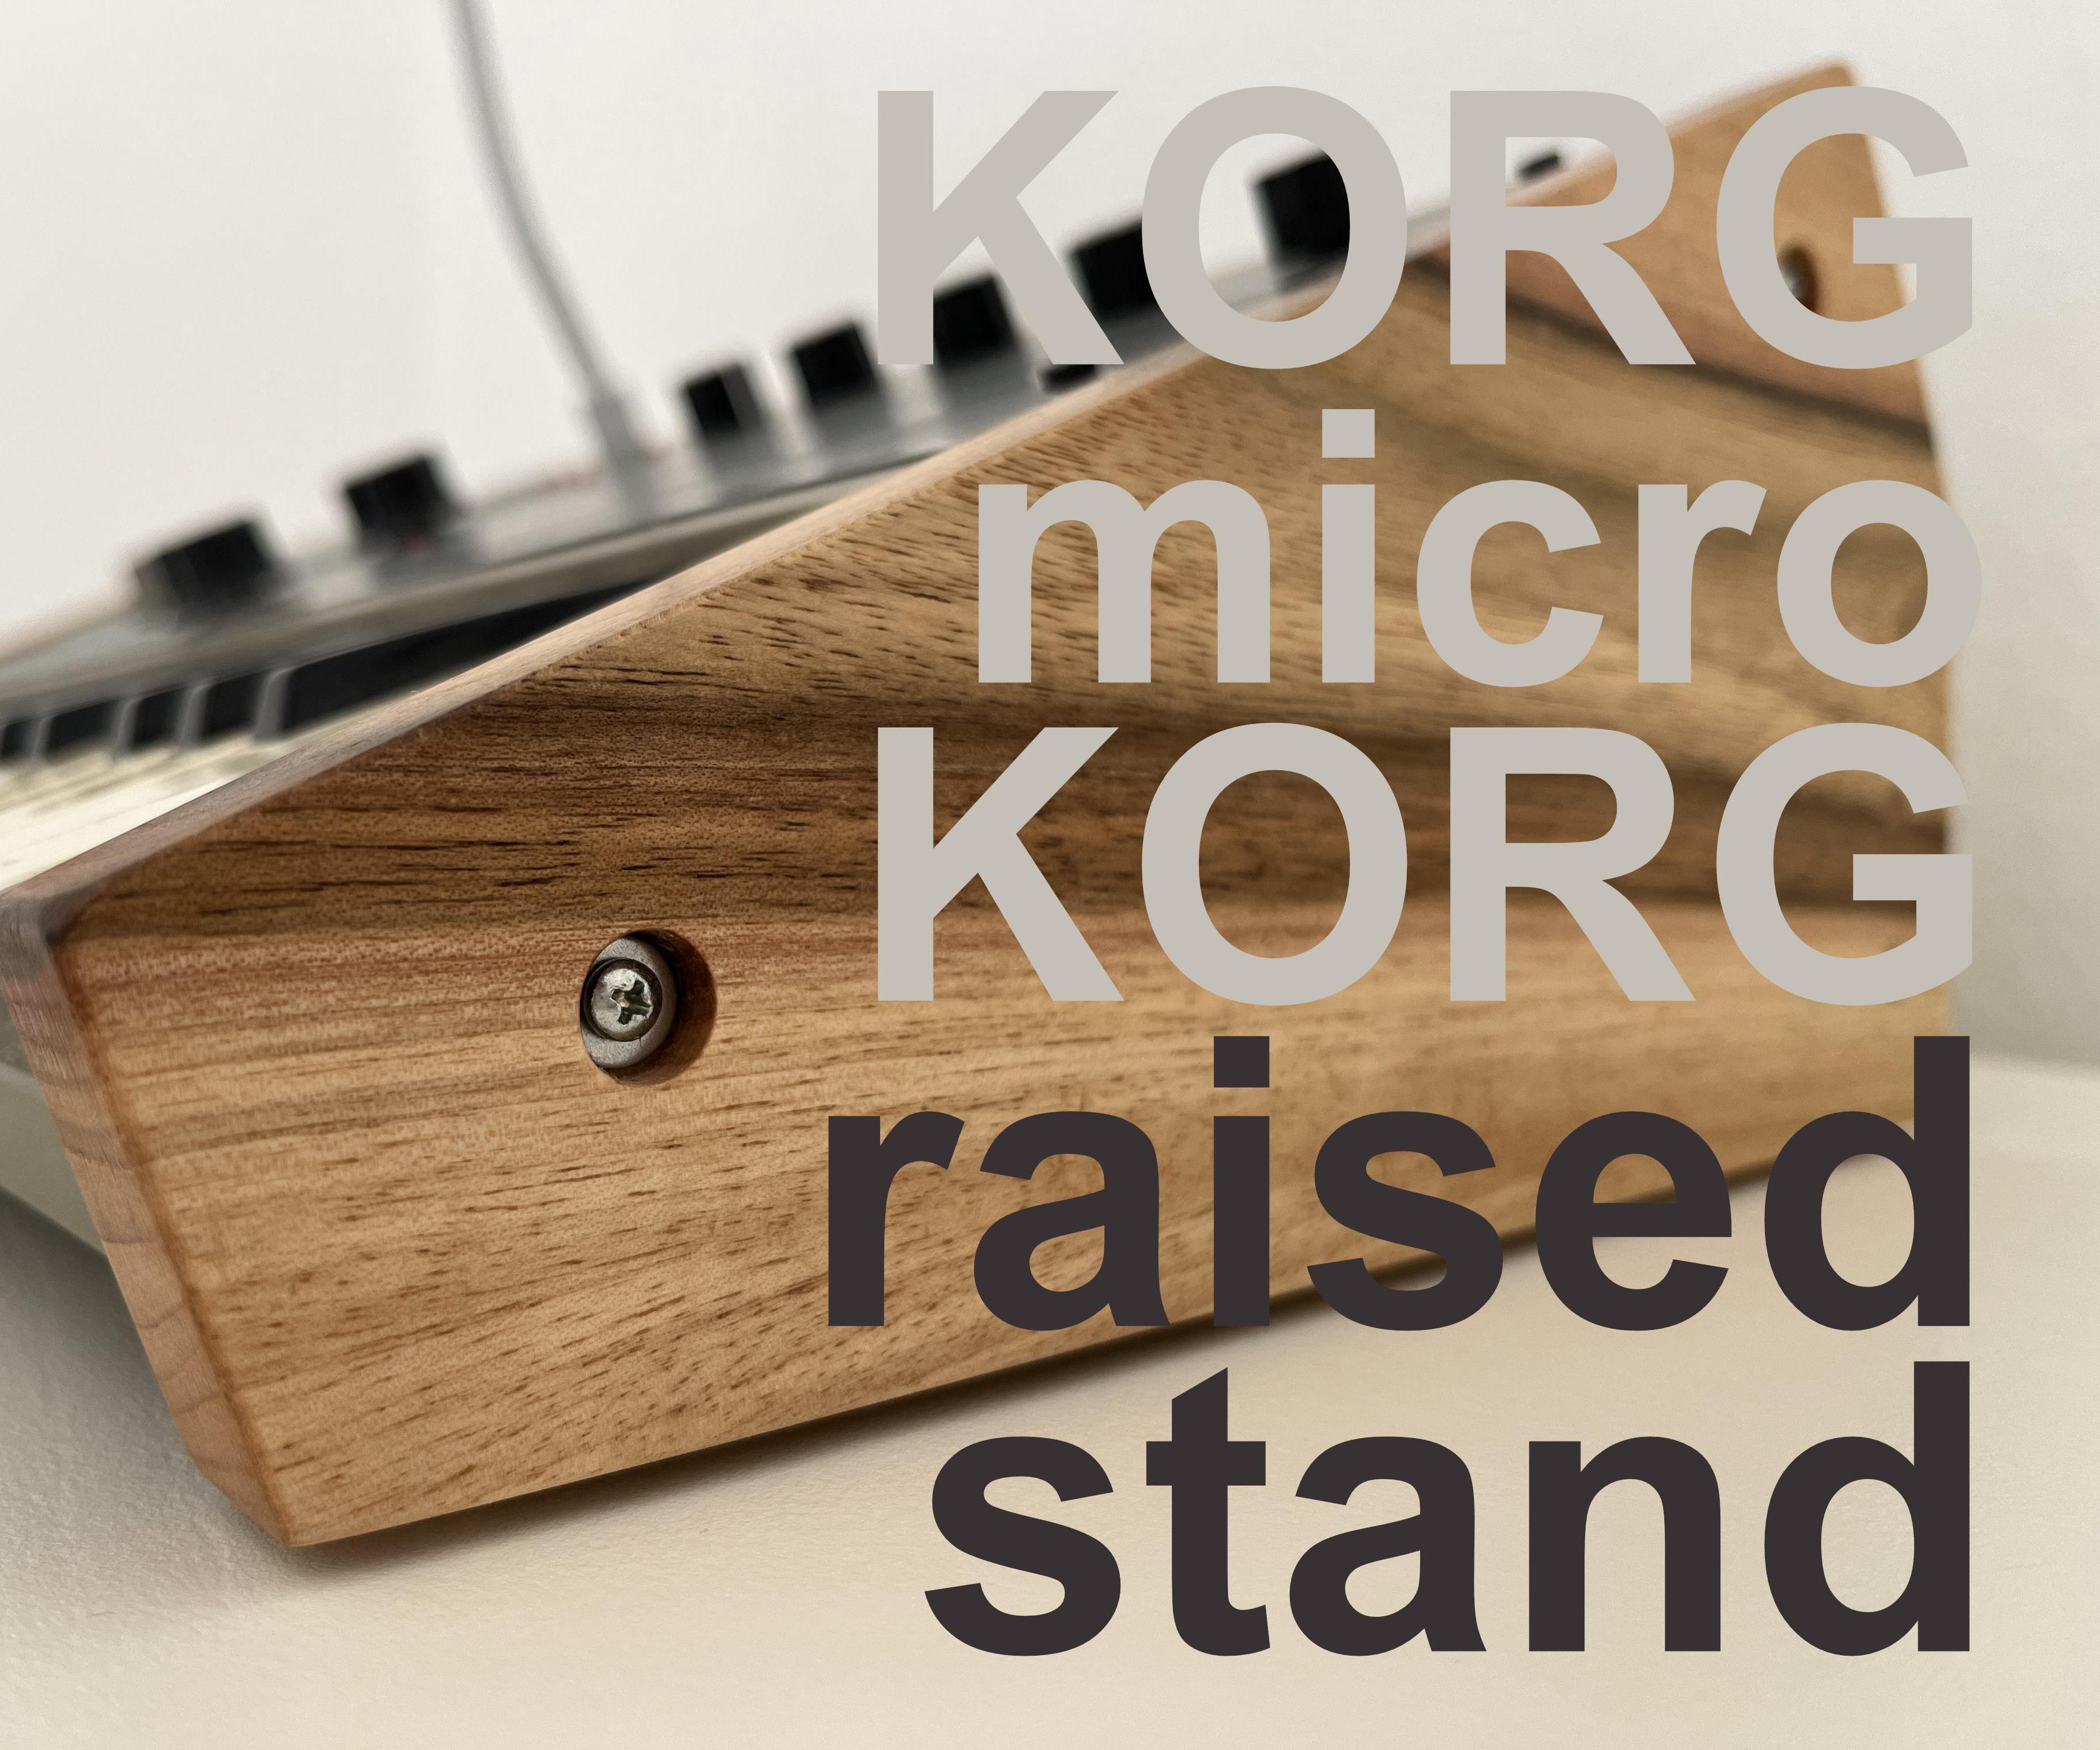 KORG MicroKORG "raised Stand" (Chassis) With SVG Templates